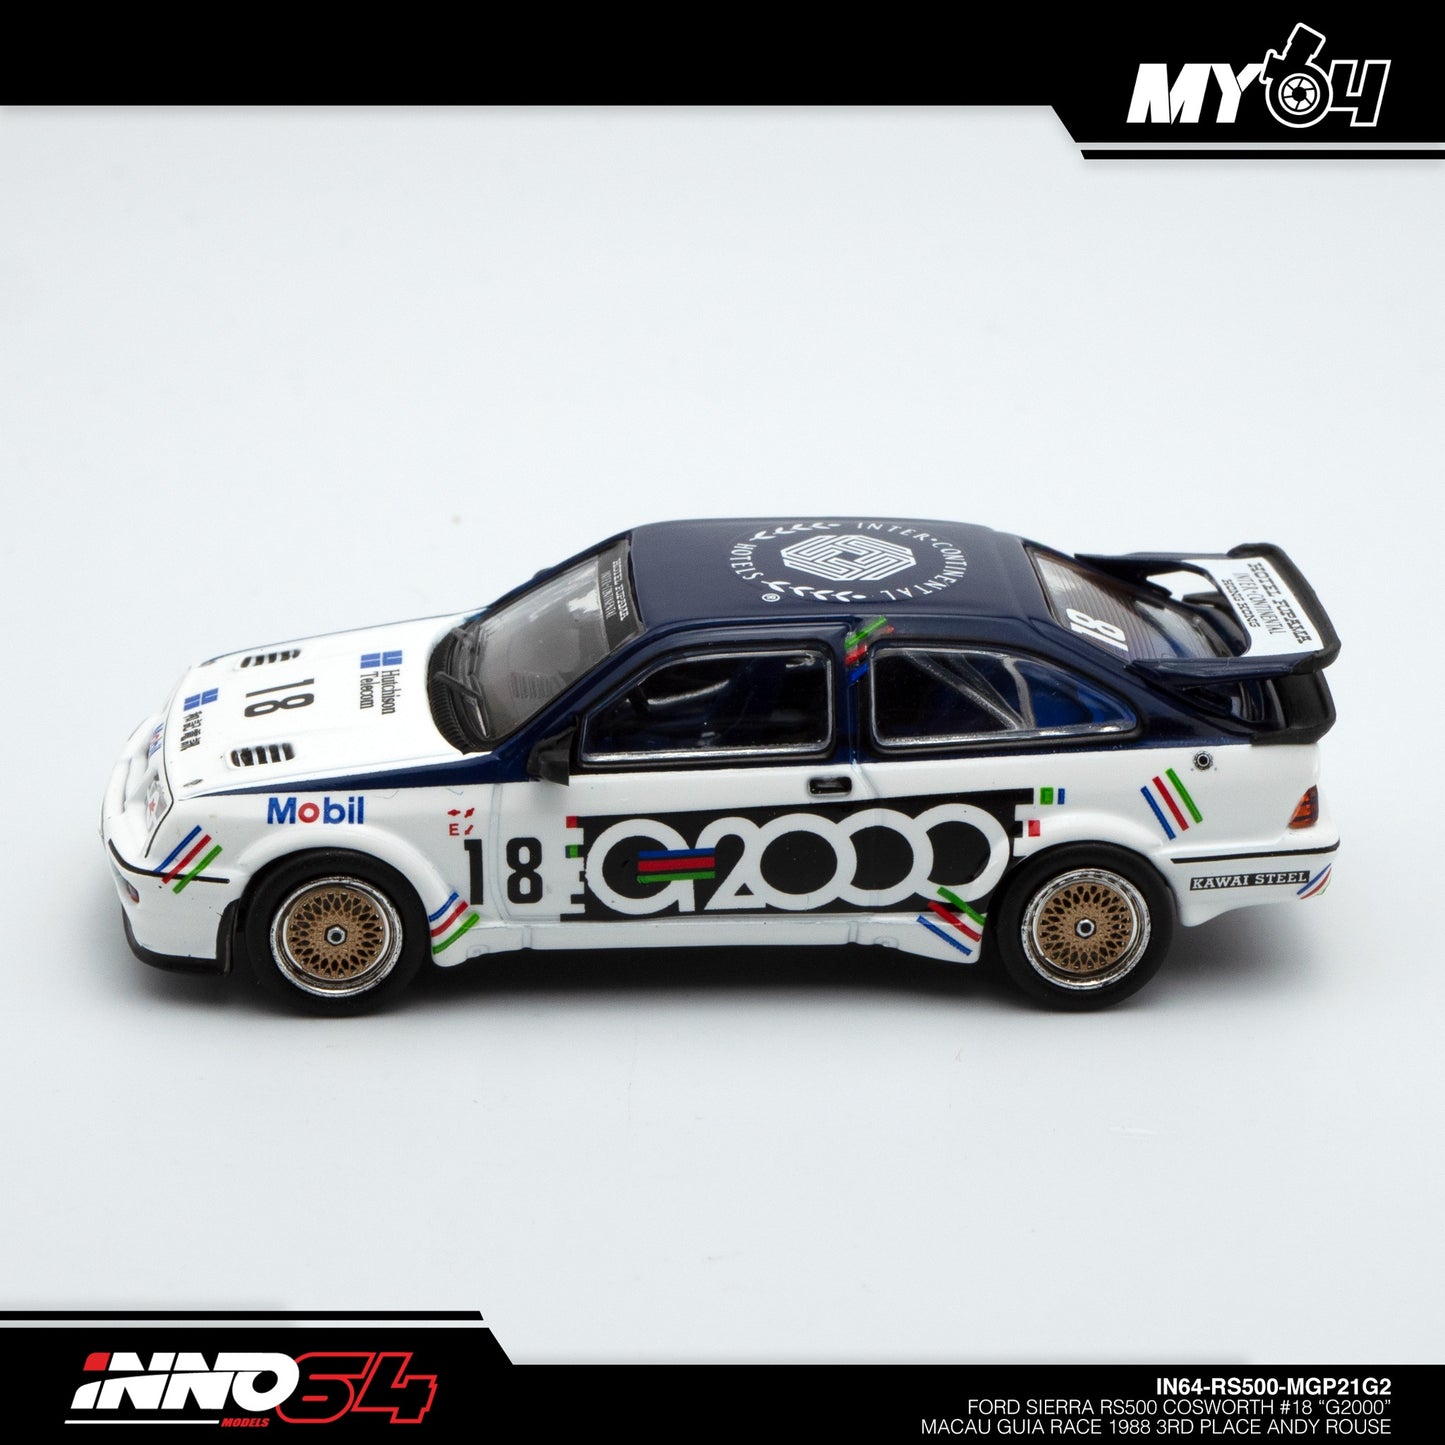 [INNO64] Ford Sierra Cosworth RS500 #18 "G2000" Macau Guia Race 1988 3rd Place Andy Rouse